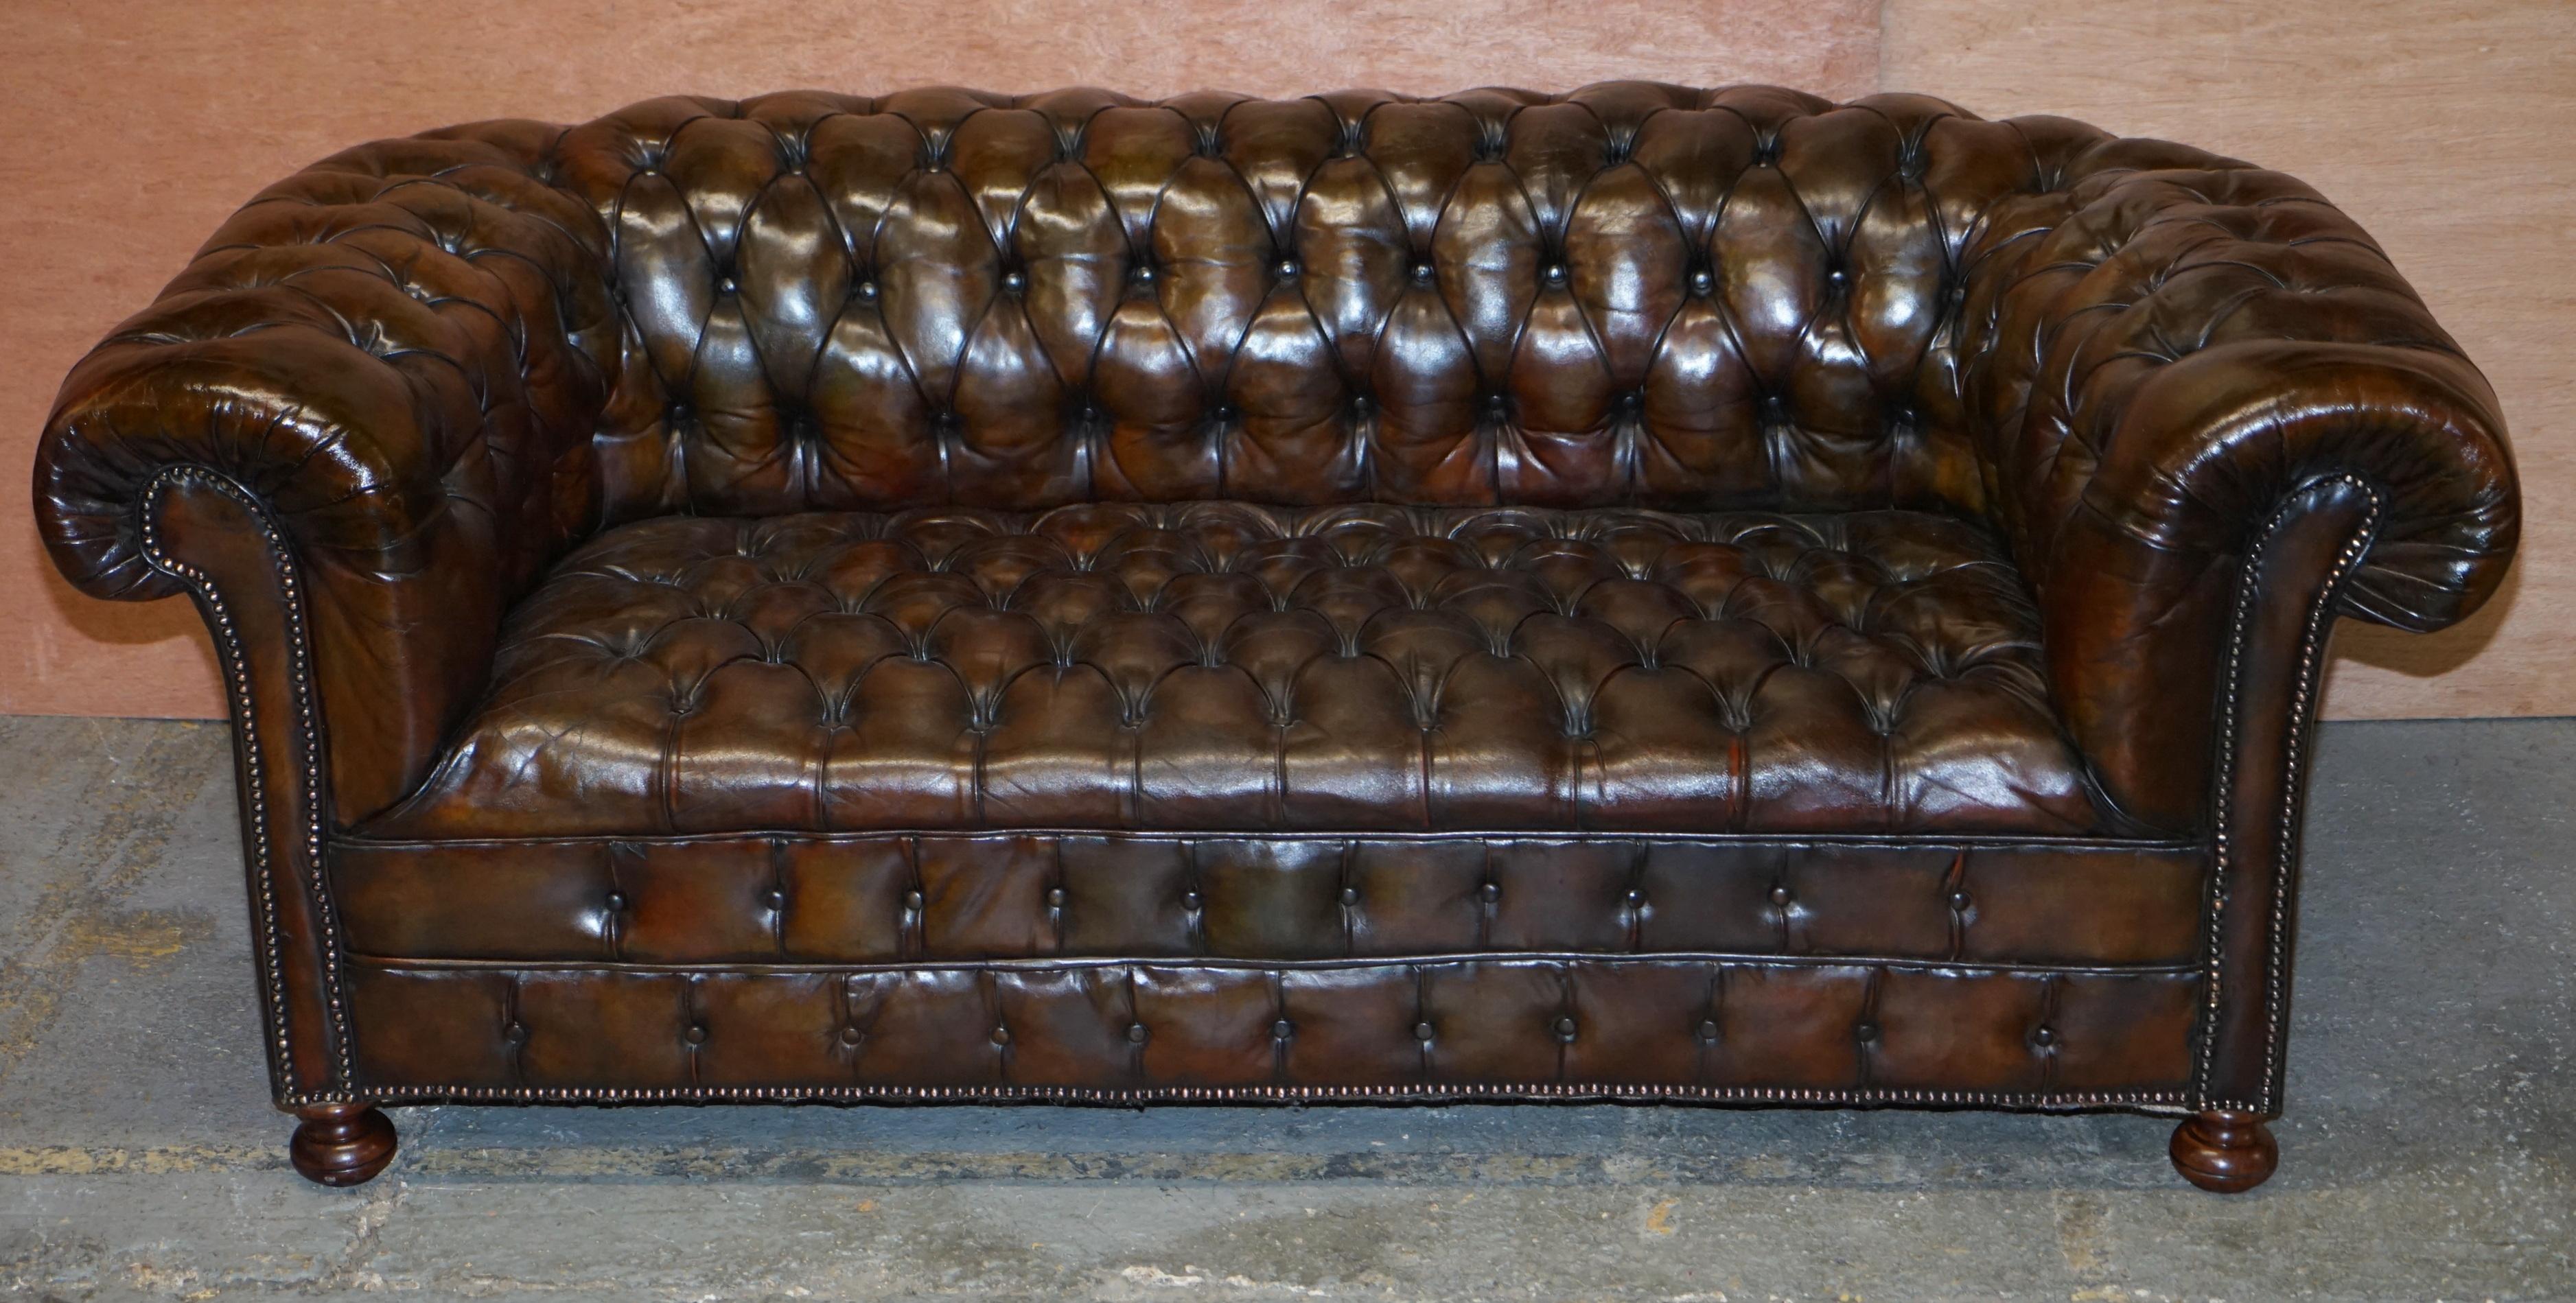 We are delighted to offer for sale this original Victorian cigar brown leather Chesterfield club sofa in restored condition with fully buttoned base and curved top arms

This is a very good find, you almost never come across late Victorian